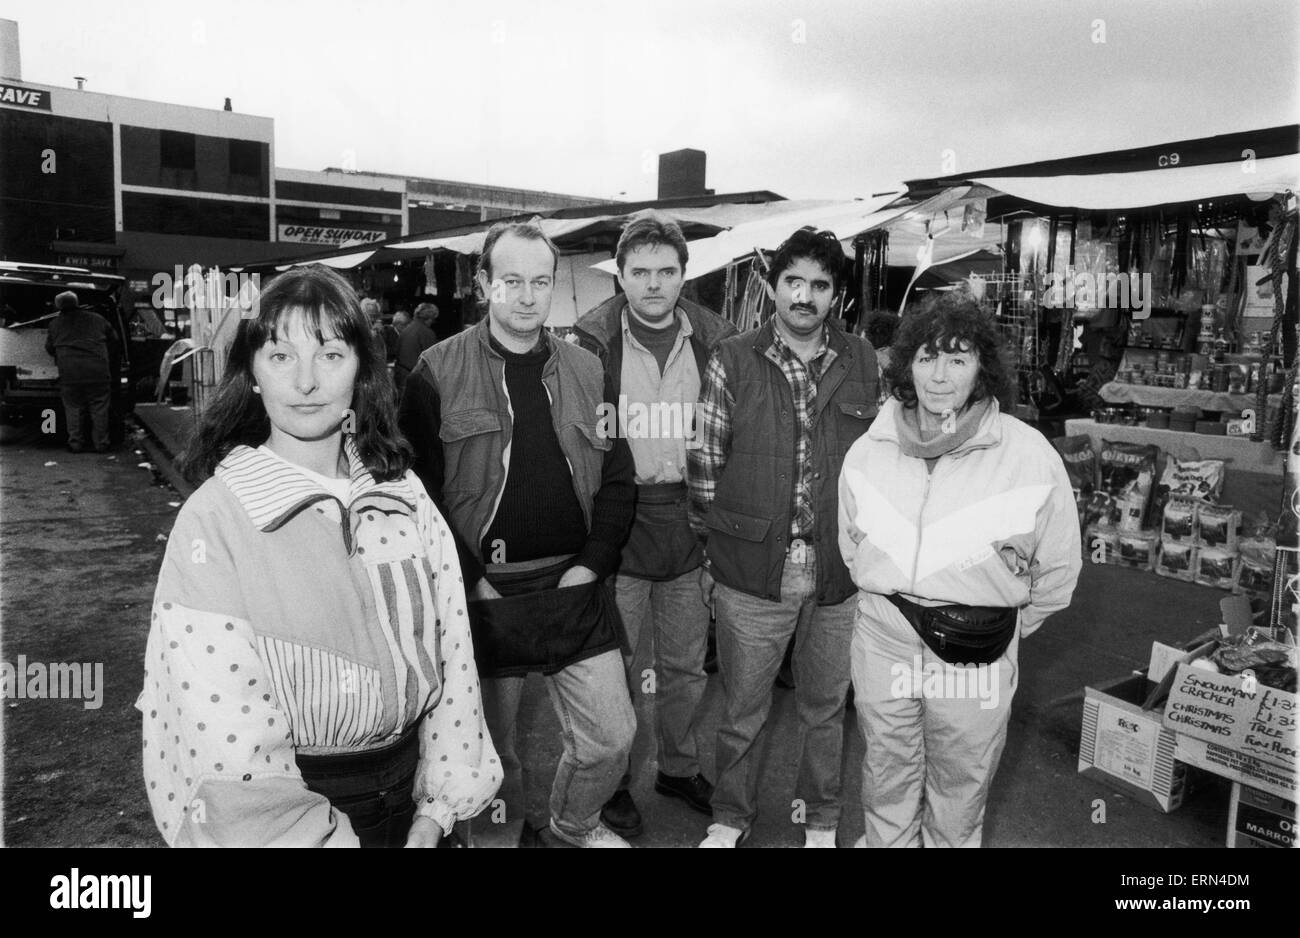 Stallholders at the Wythenshawe Market seen here posing for the camera. The market traders are furious with the Council after a parking ban has driven business away in the lead up to Christmas. Left to Right Sue Husdon, Derek Hamnett, Martin Osborne, M Mahmod and Pat Wilkinson. 16th December 1994 Stock Photo